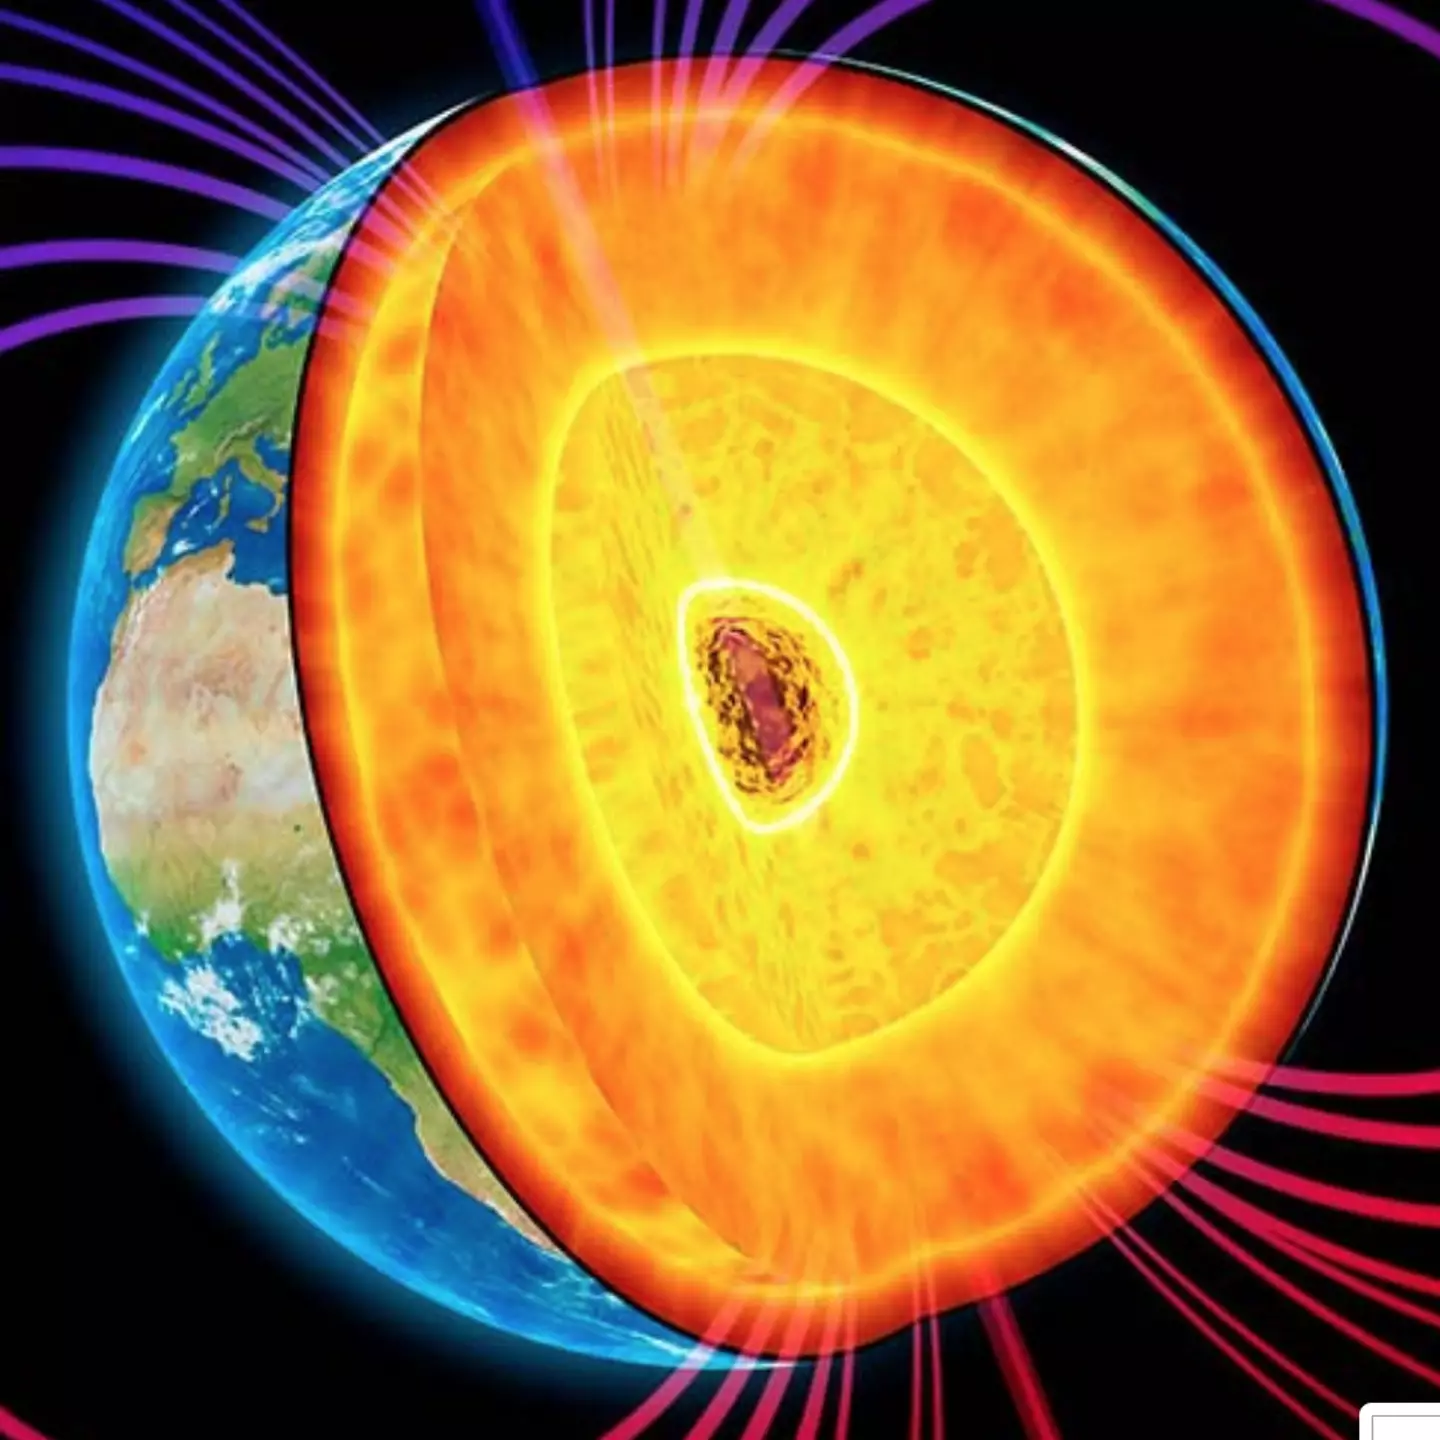 Over billions of years, water that has leaked through the Earth's surface has caused a new surface to form between the outer core and mantle of the Earth.